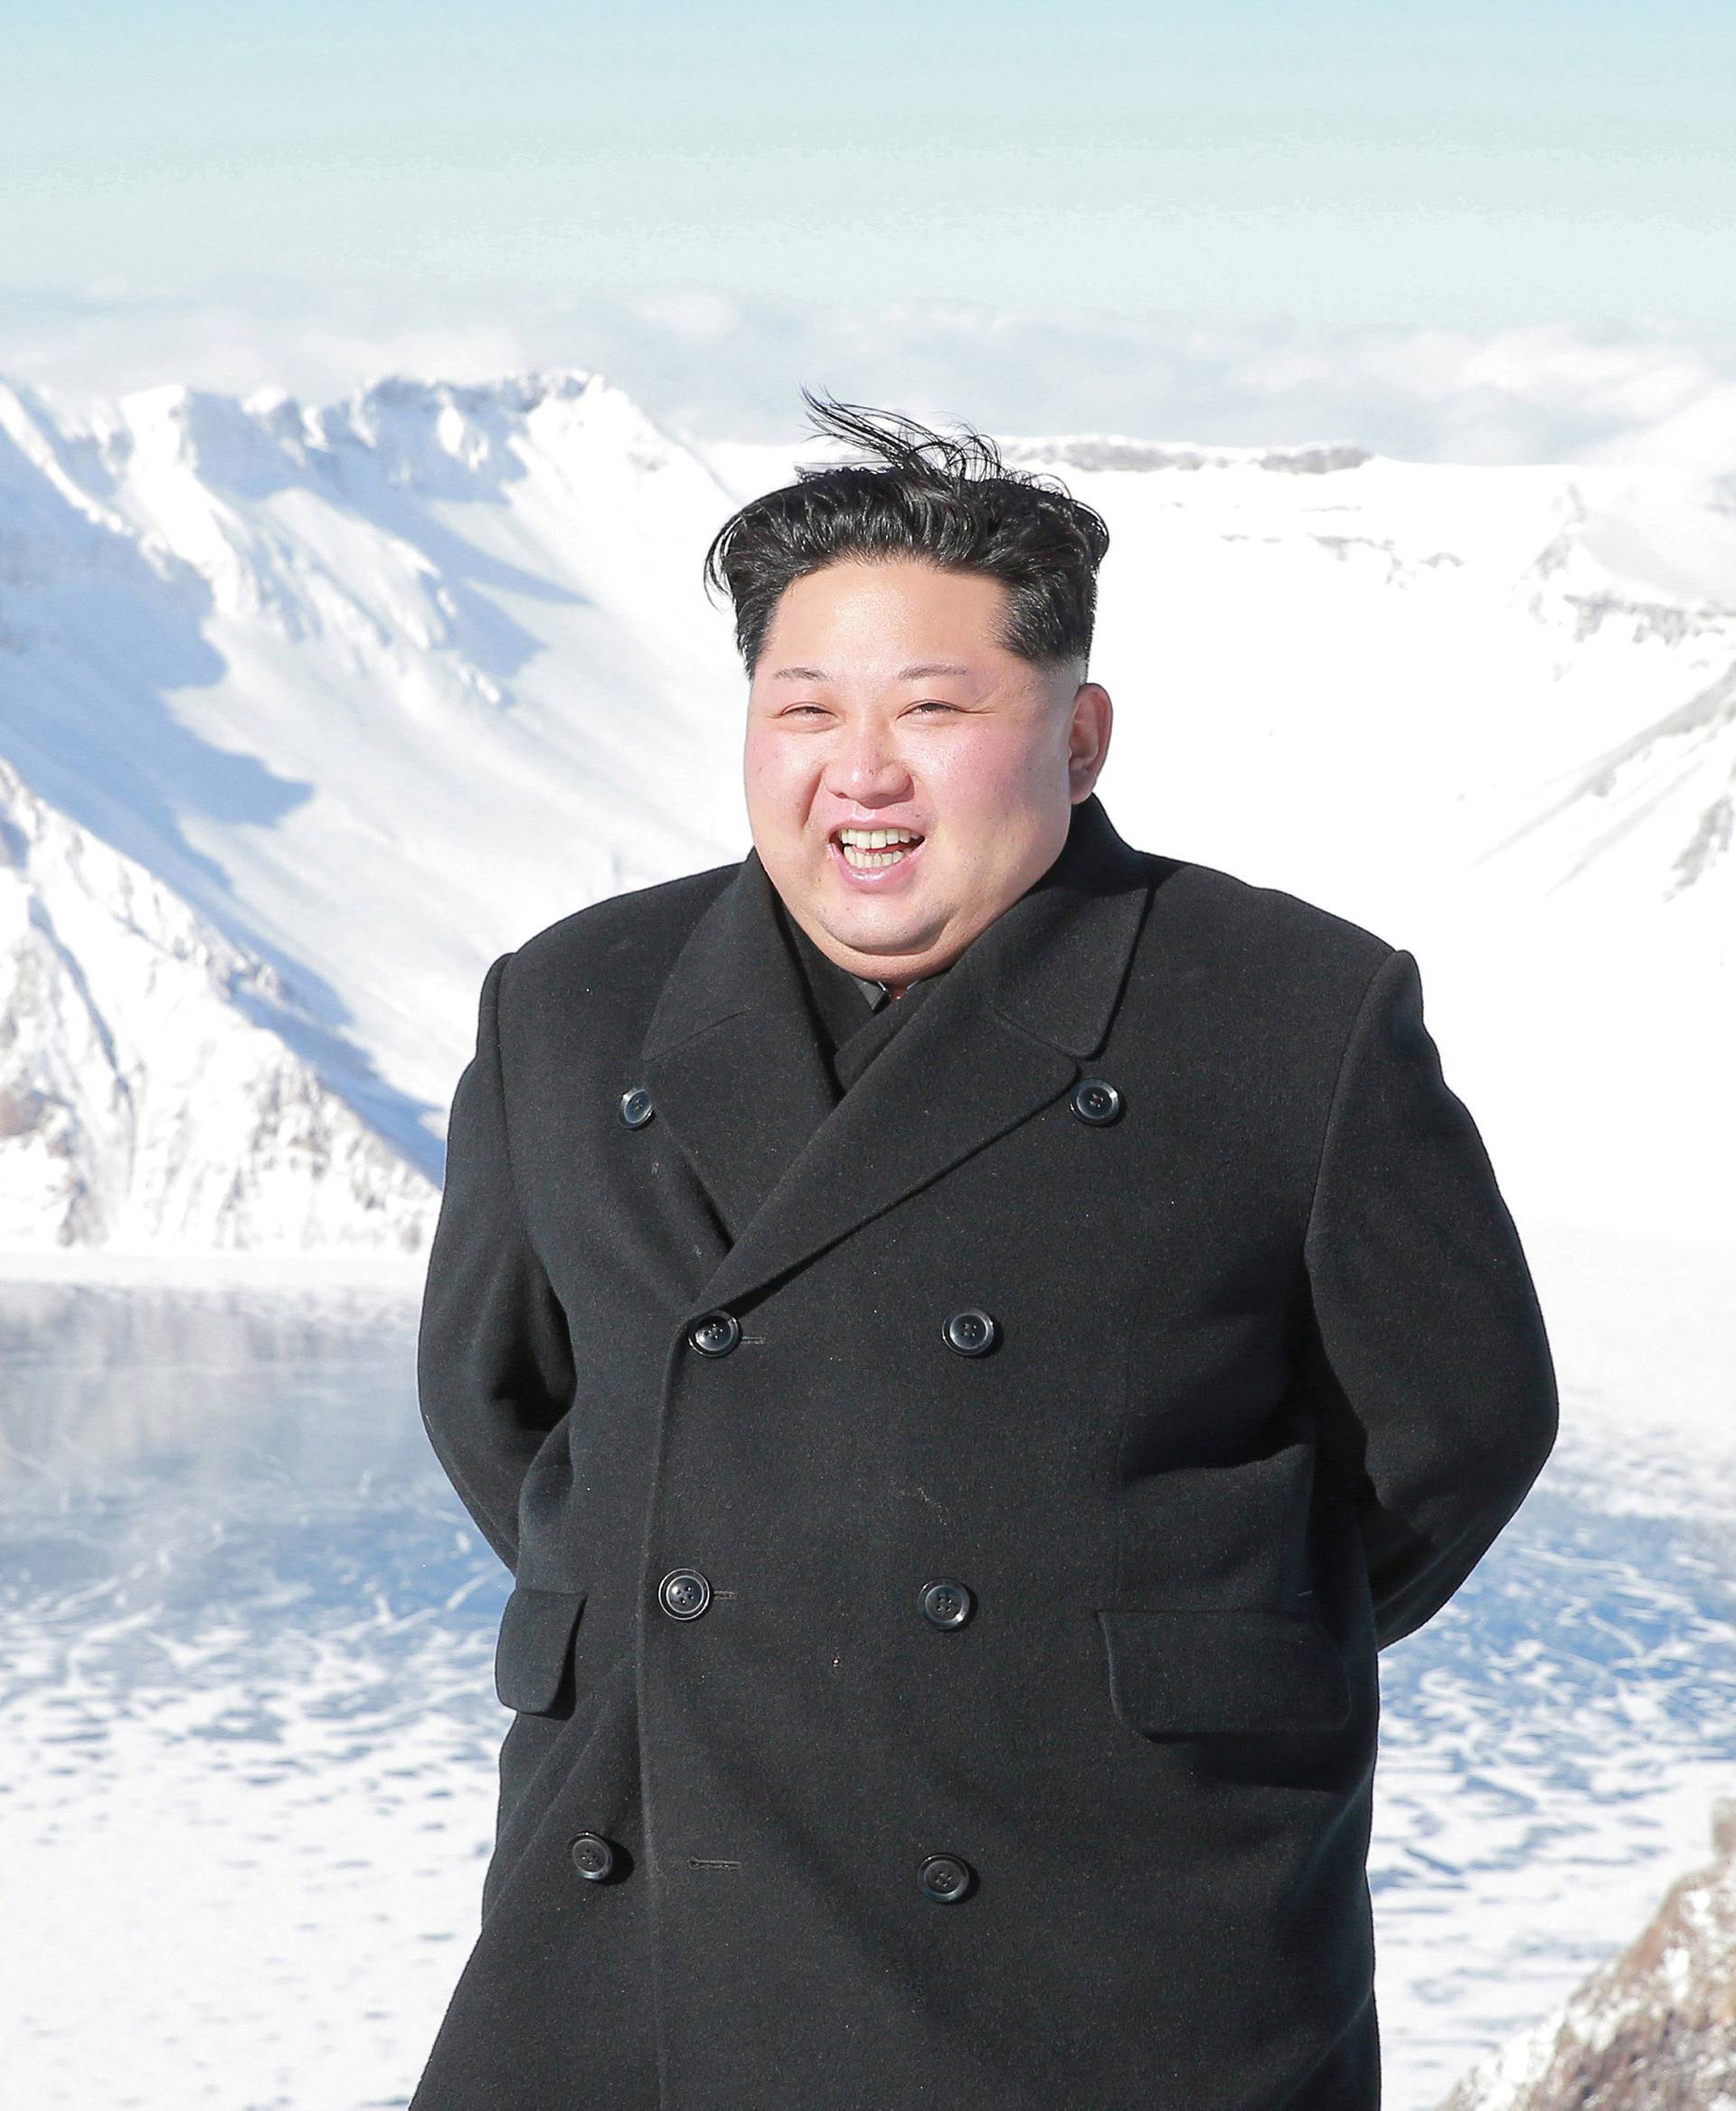 North Korean leader Kim Jong Un visits Mount Paektu in this photo released by North Korea's KCNA